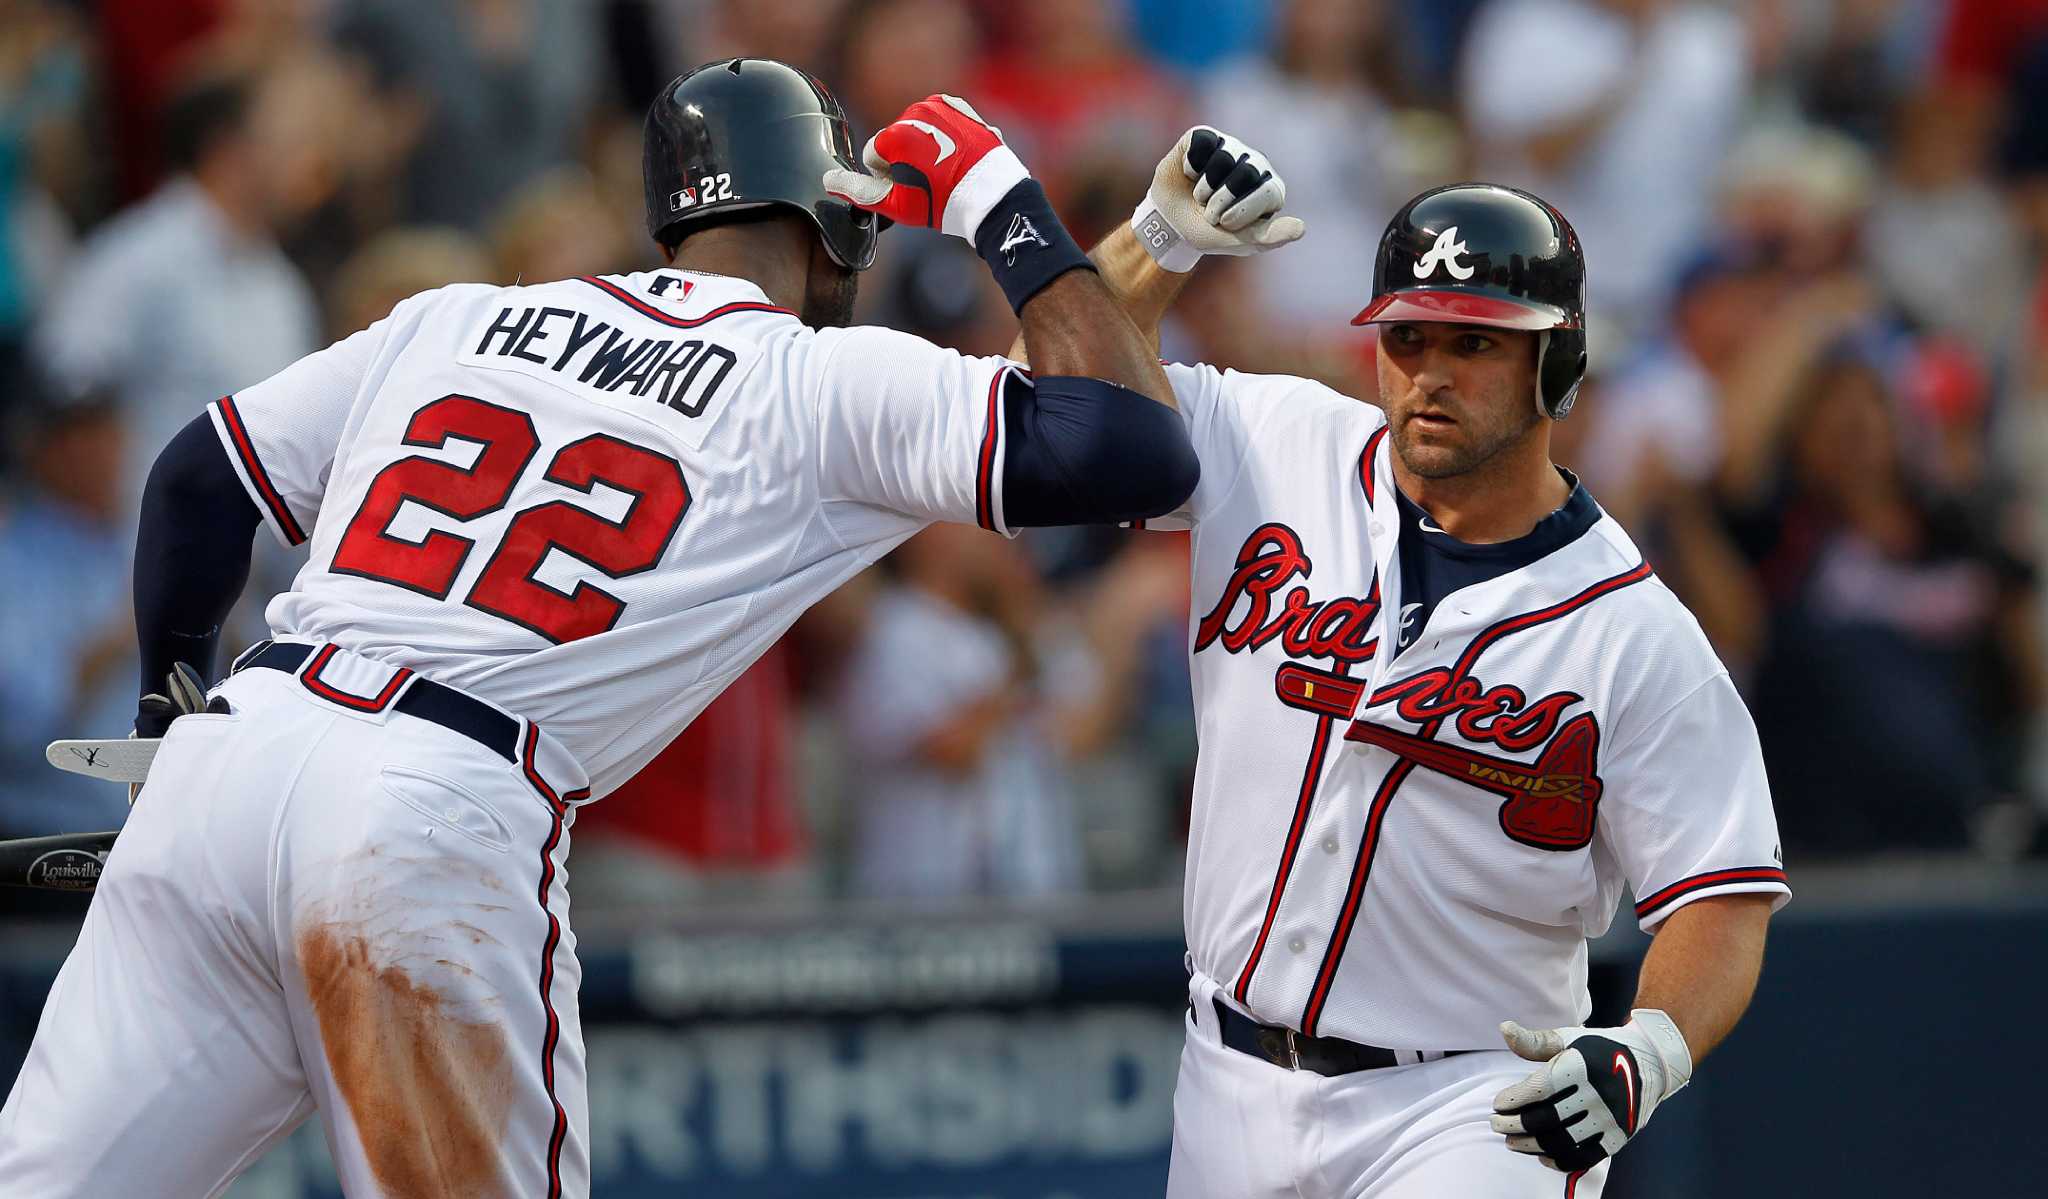 This Day in Braves History: Dan Uggla extends hitting streak to 20